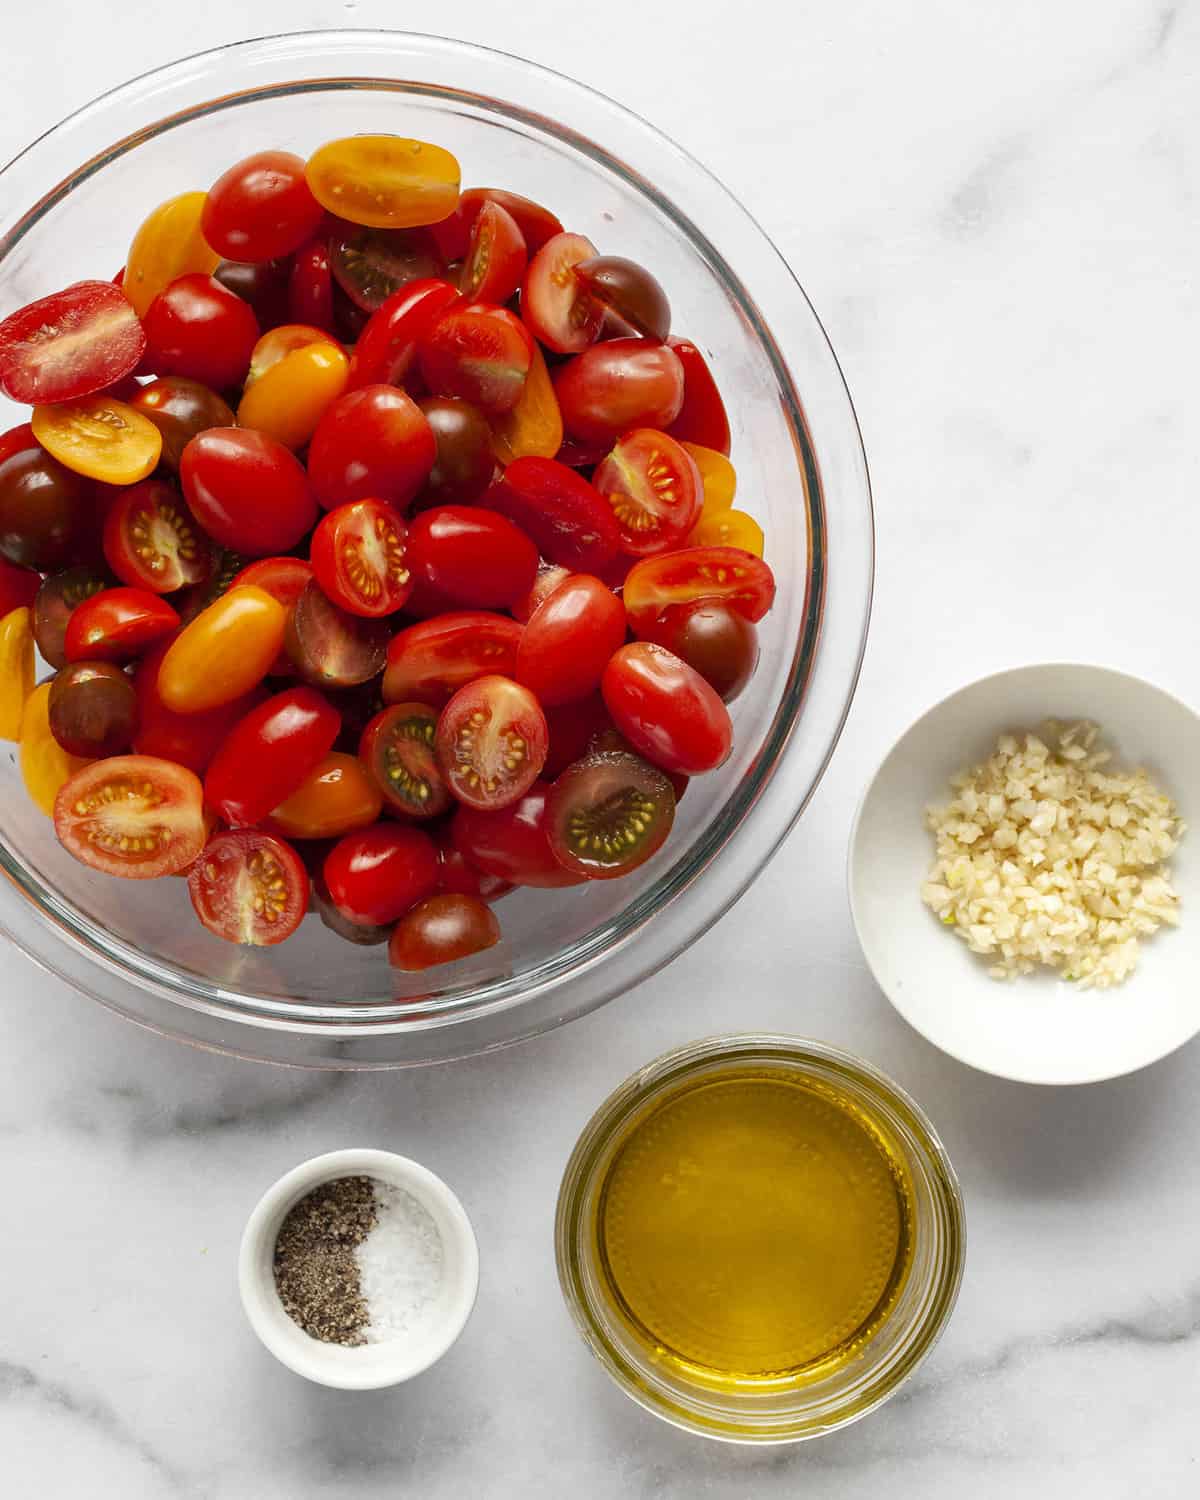 Ingredients including cherry tomatoes, garlic, olive oil, salt and pepper.